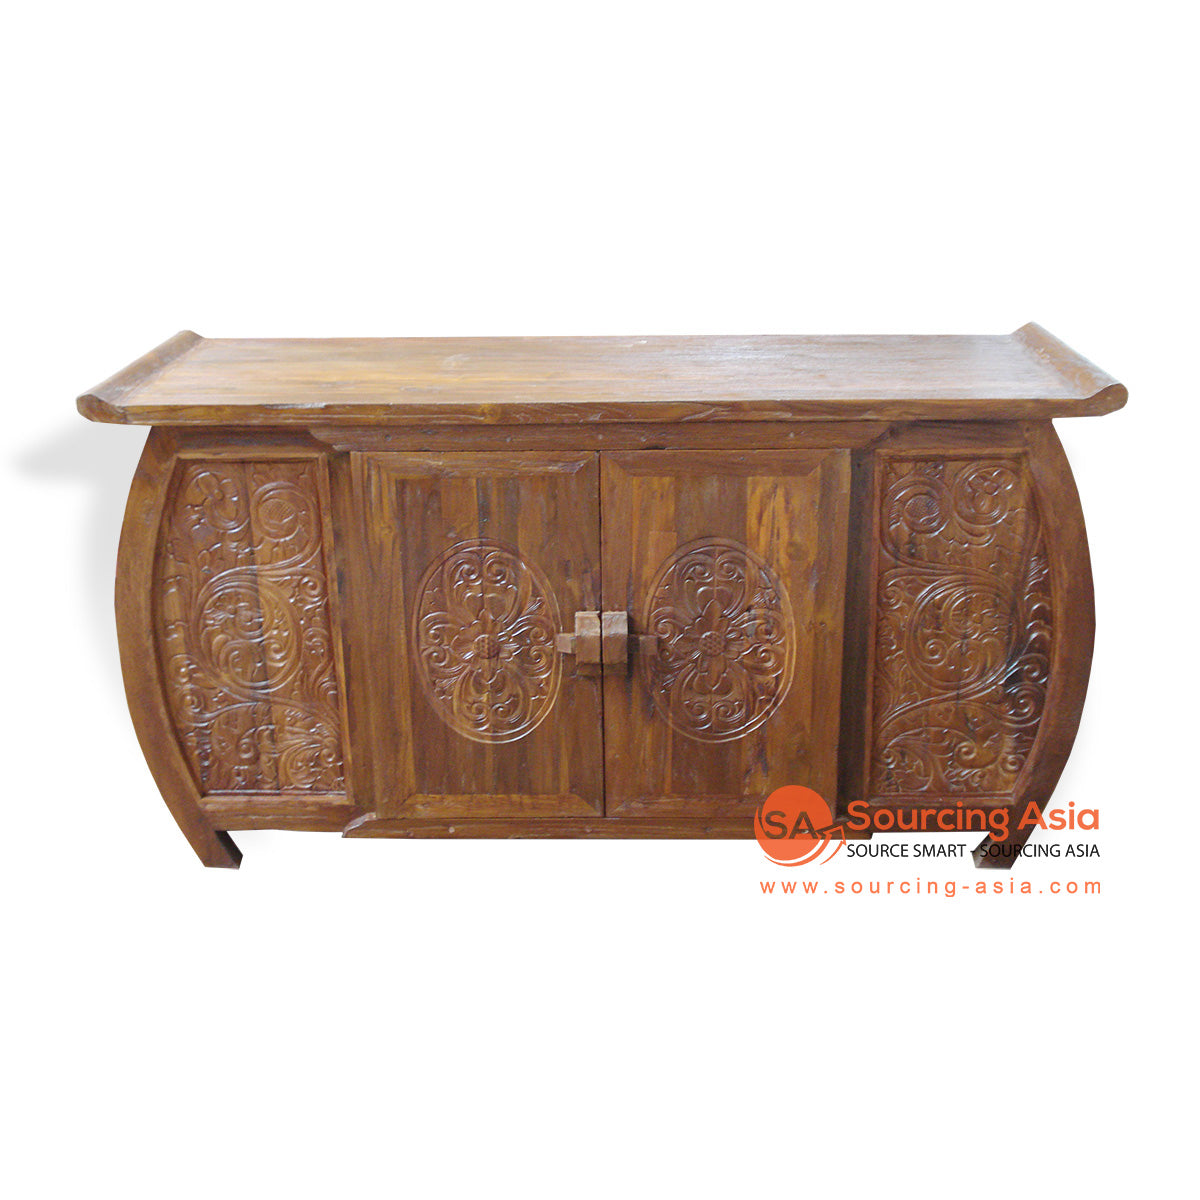 TR00174 NATURAL RECYCLED TEAK WOOD TWO DOORS ROUNDED ENDS BUFFET WITH CARVING